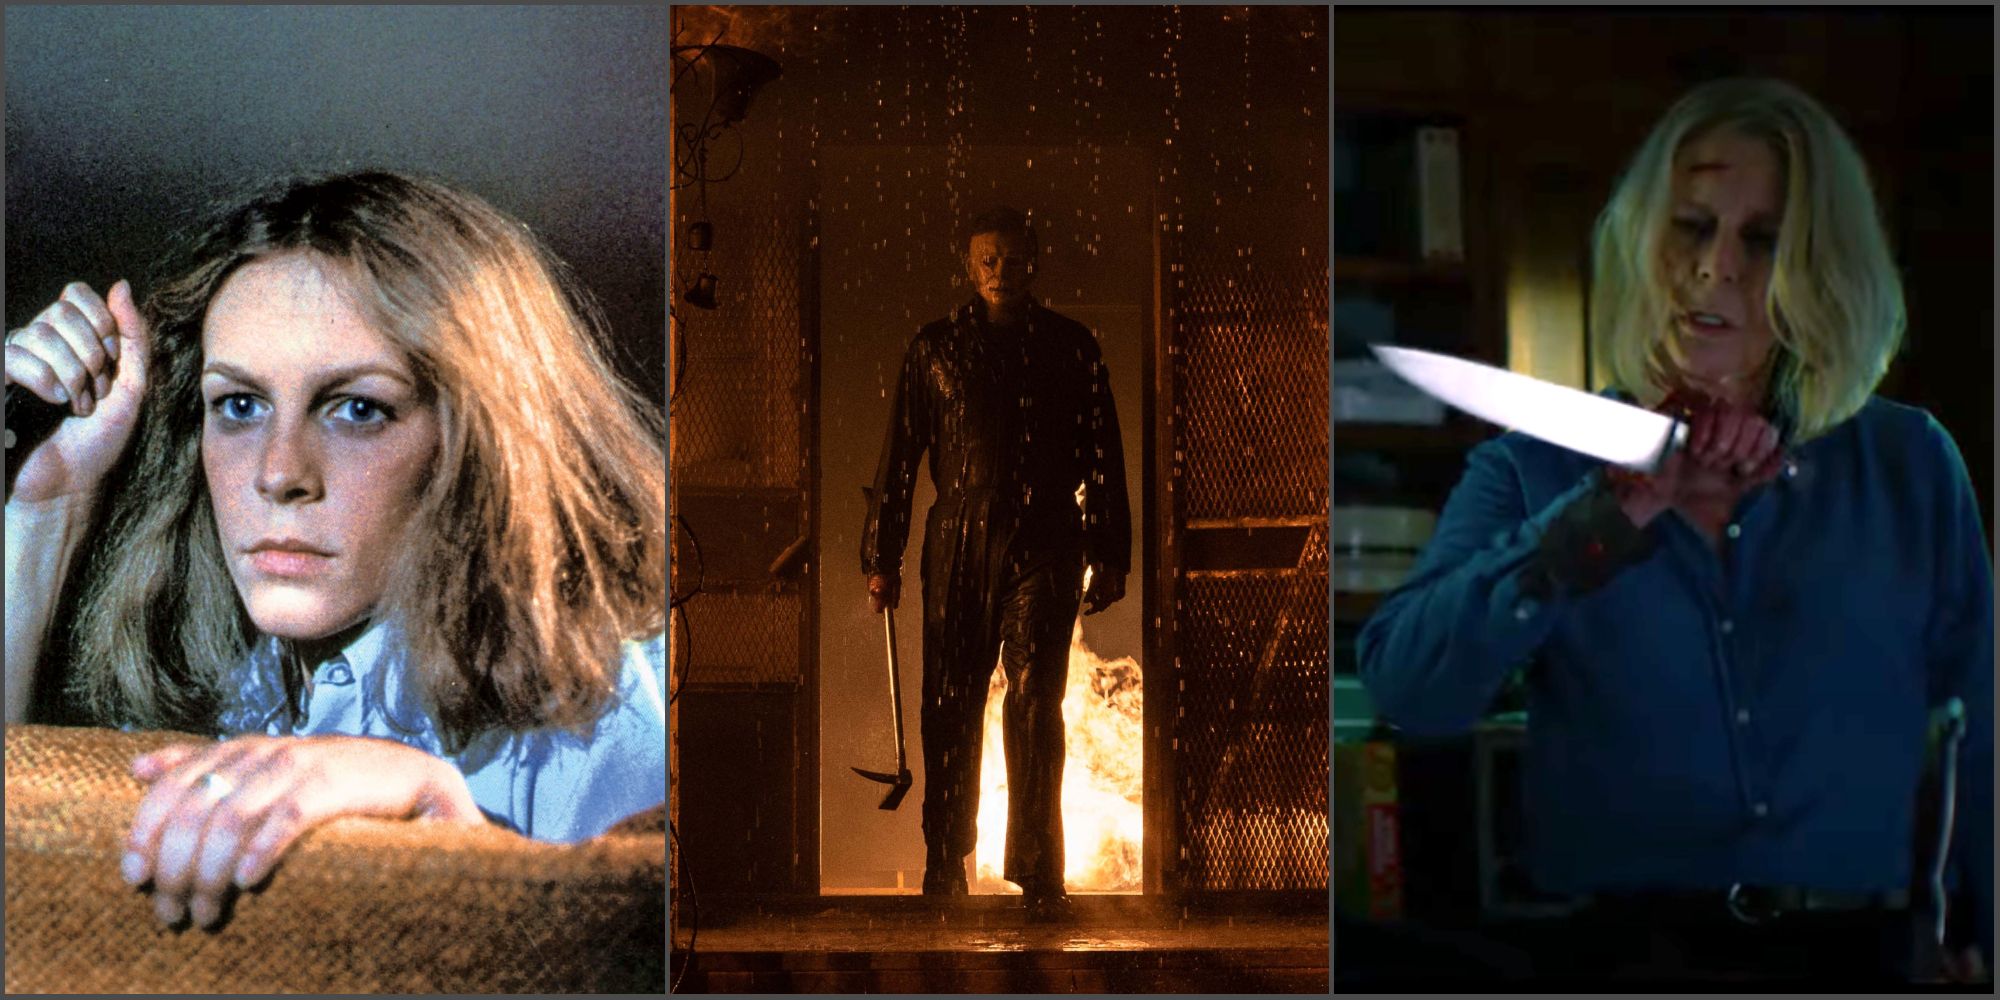 The Halloween Franchise: A young Laurie Strode holding a knife, Micahel emerging from a burning building, and older Laurie holding a knife